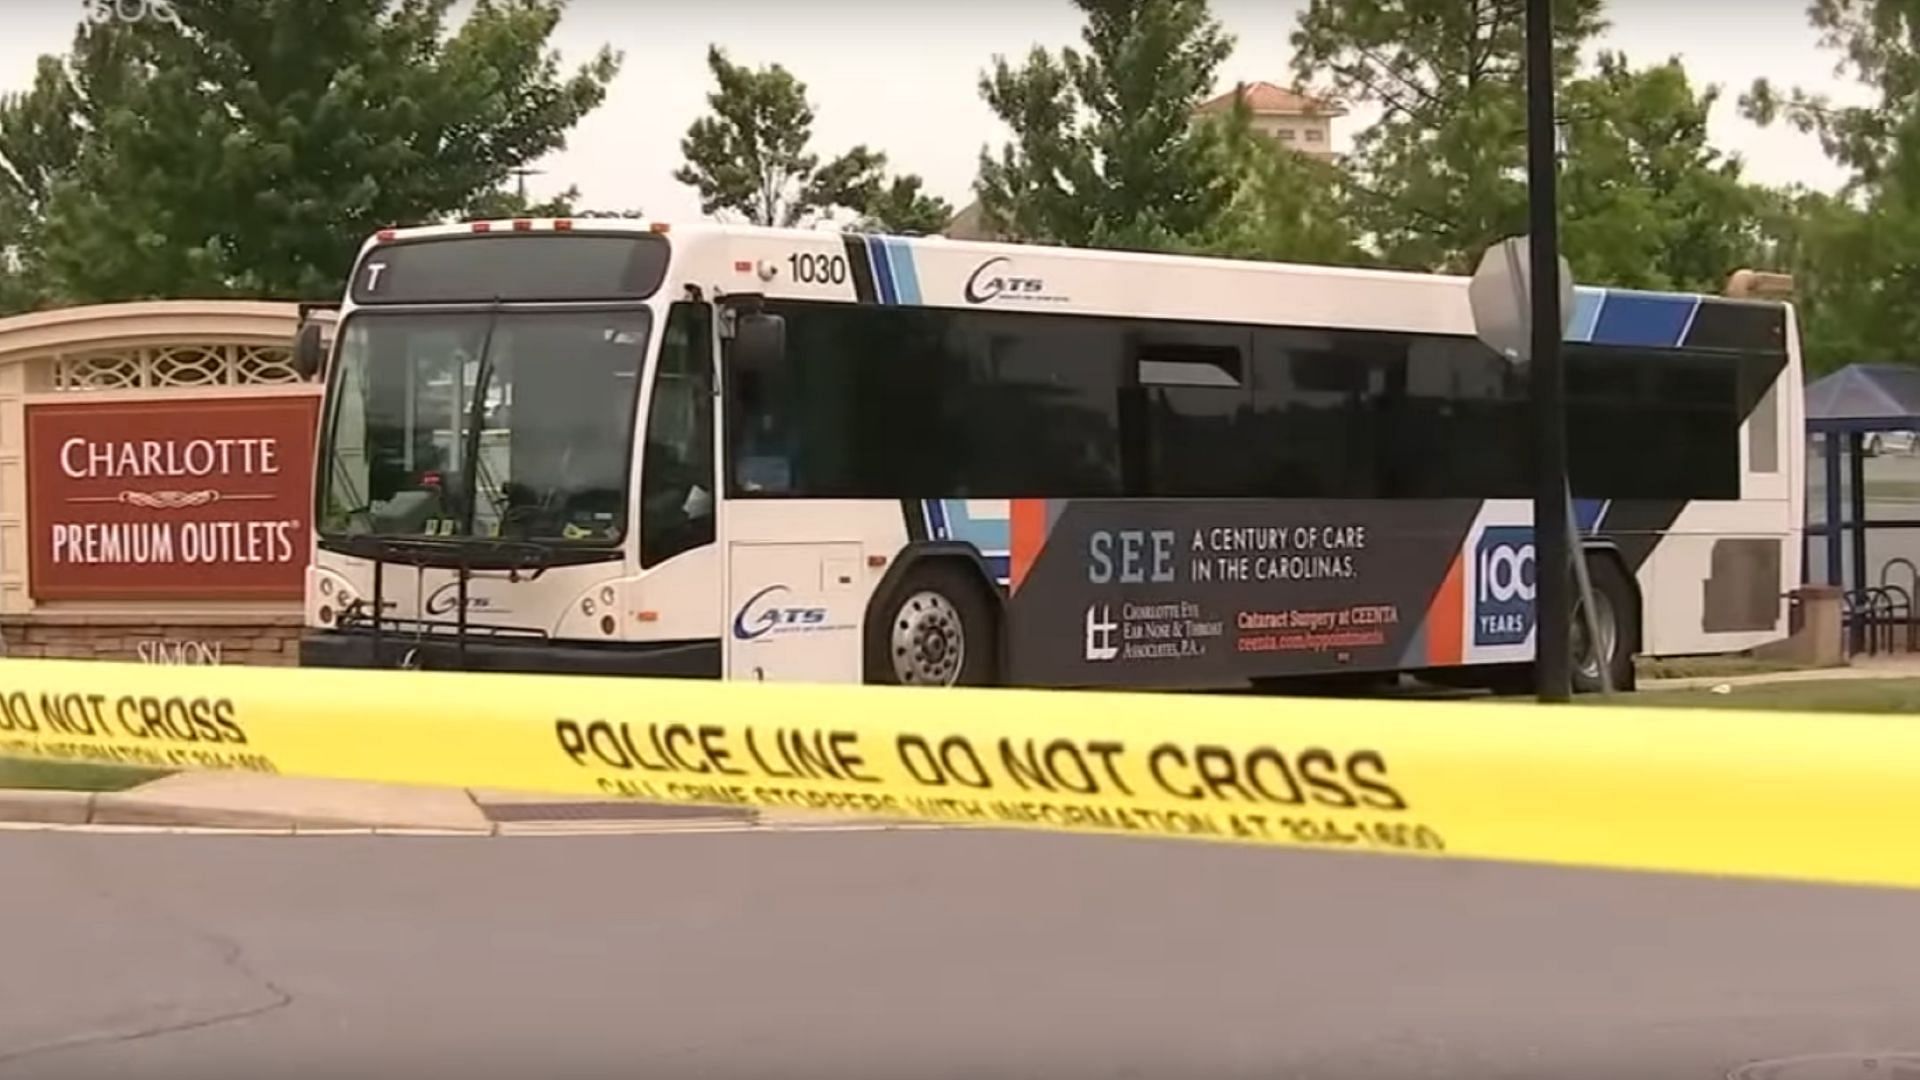 Charlotte Area Transit System (CATS) released surveillance video of a shootout between driver and passenger on Charlotte bus. (Image via Charlotte Area Transit System)